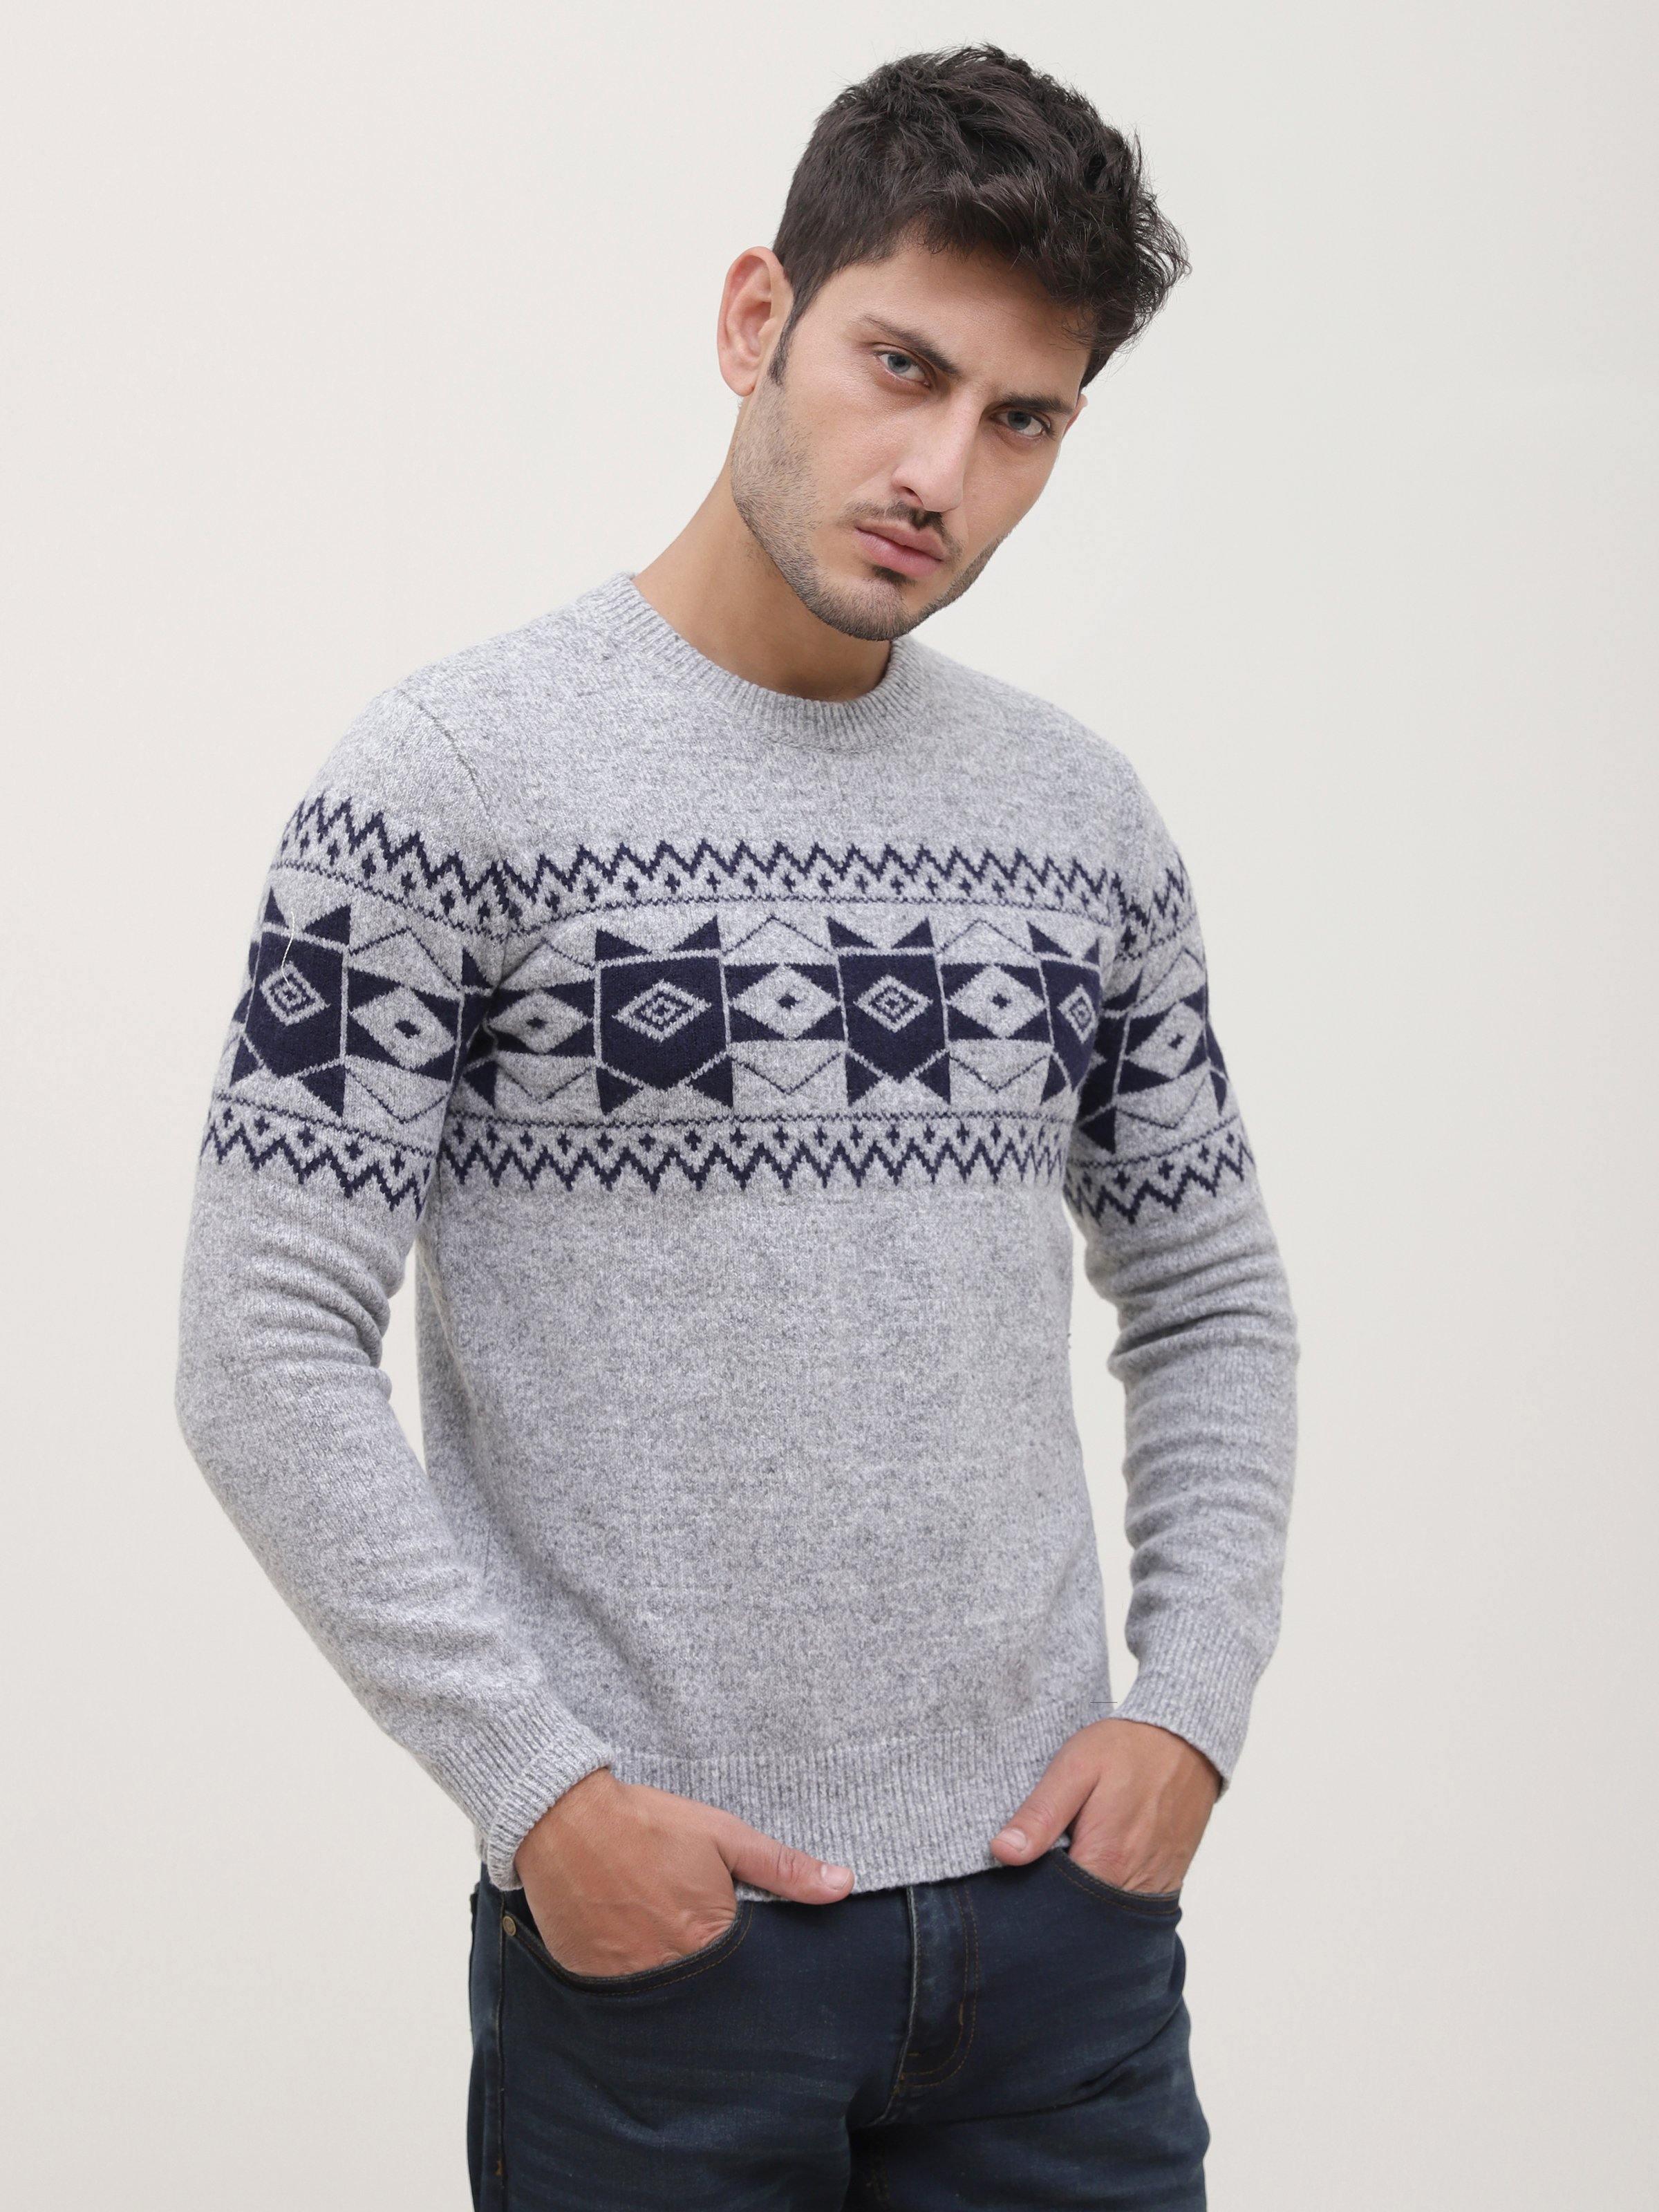 SWEATER ROUND NECK FULL SLEEVE GREY BLUE at Charcoal Clothing